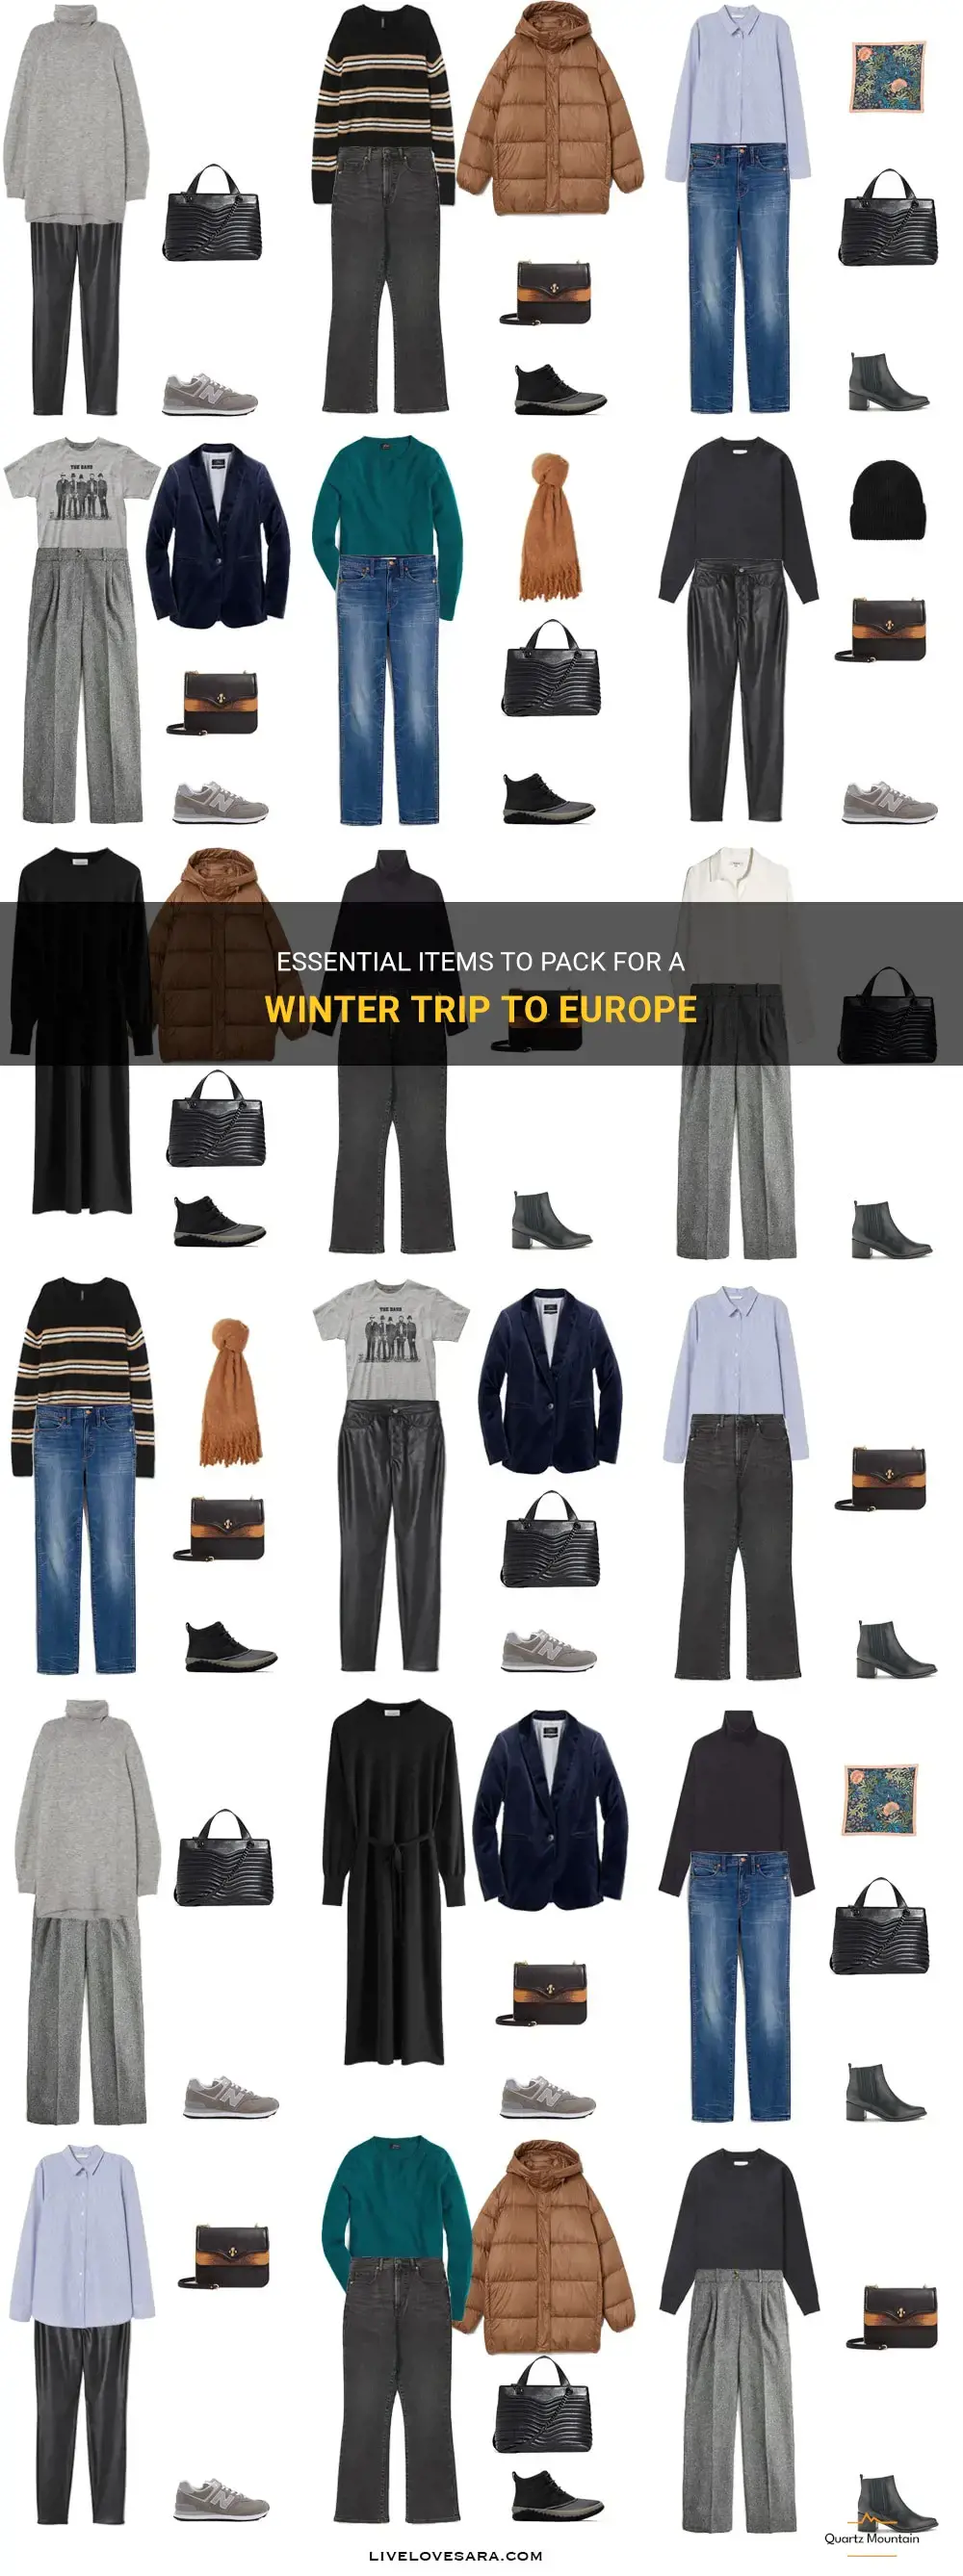 suggested what to pack for europe in winter